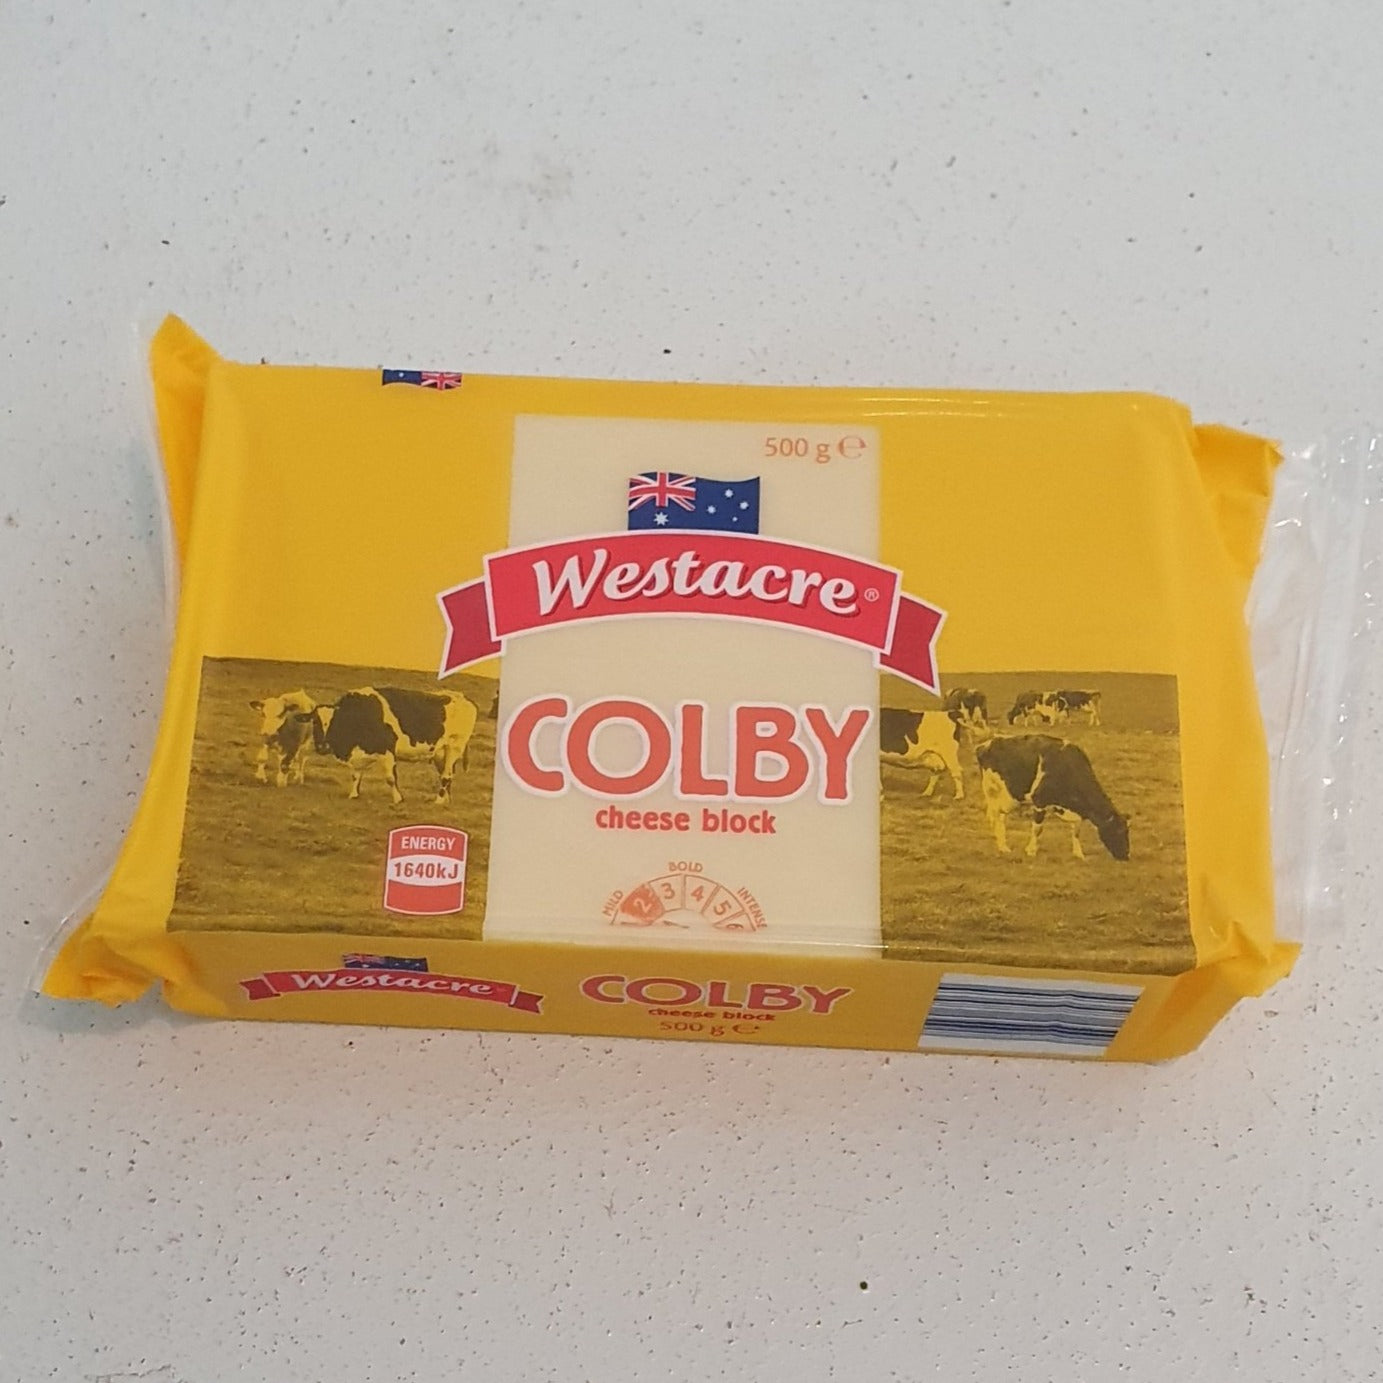 Westacre Colby Cheese 500G